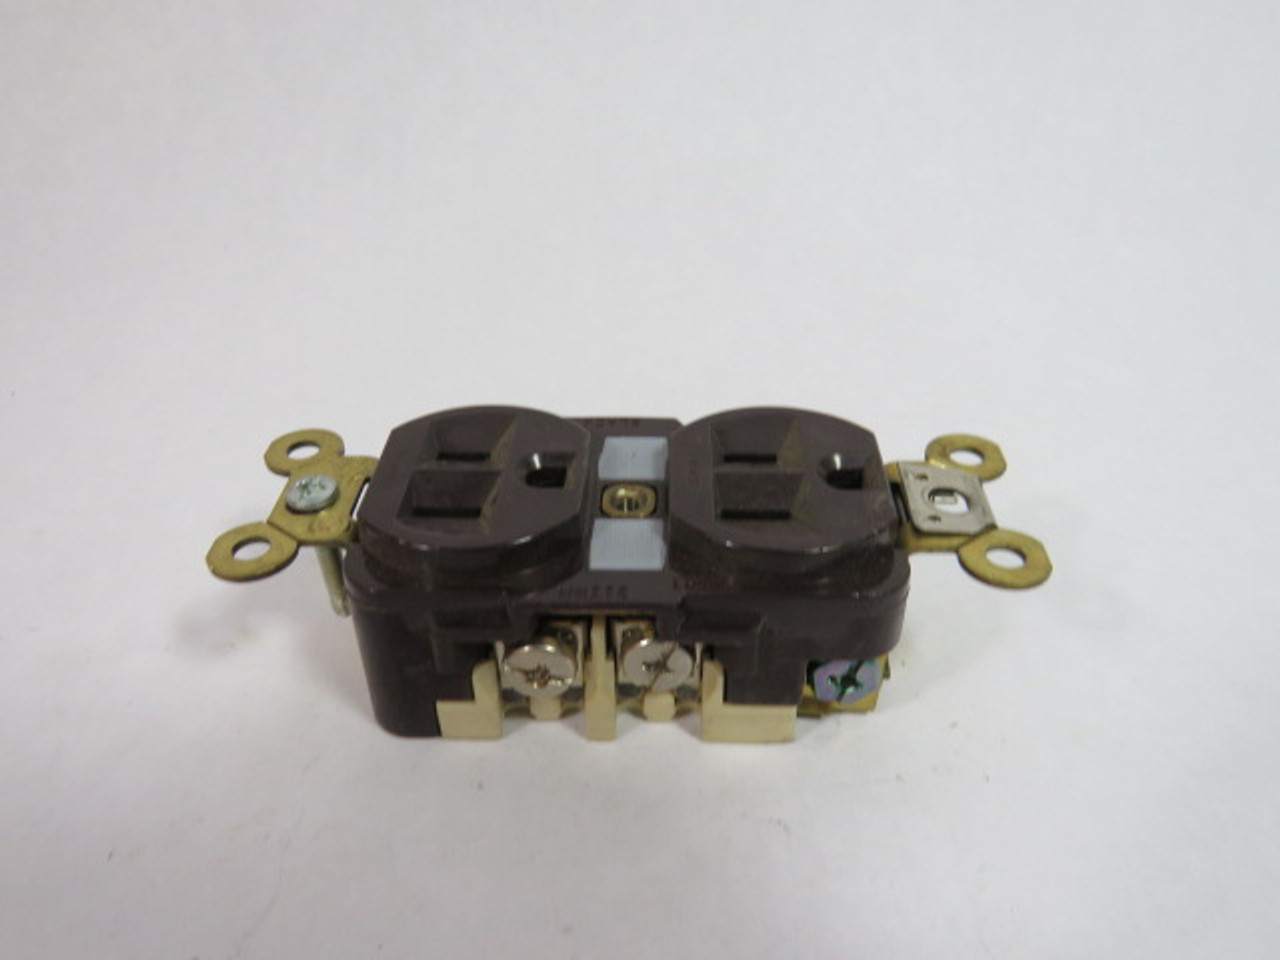 Hubbell HBL5262 Brown Duplex Receptacle 15A 125V 3W 2P USED